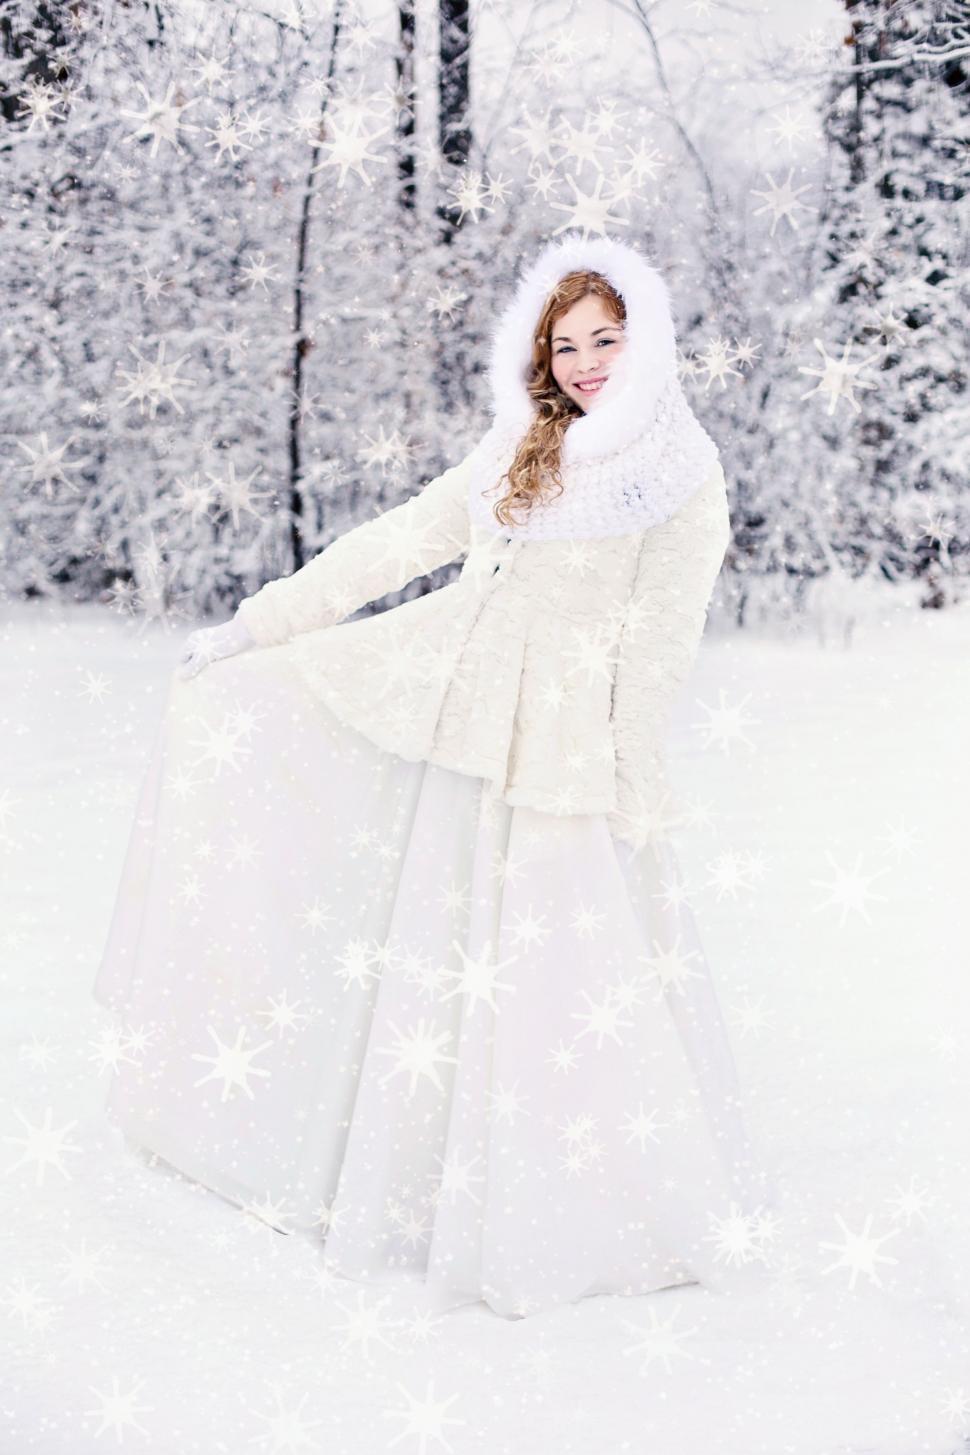 Free Image of Woman in White Gown with Xmas Snowflakes in Forest 